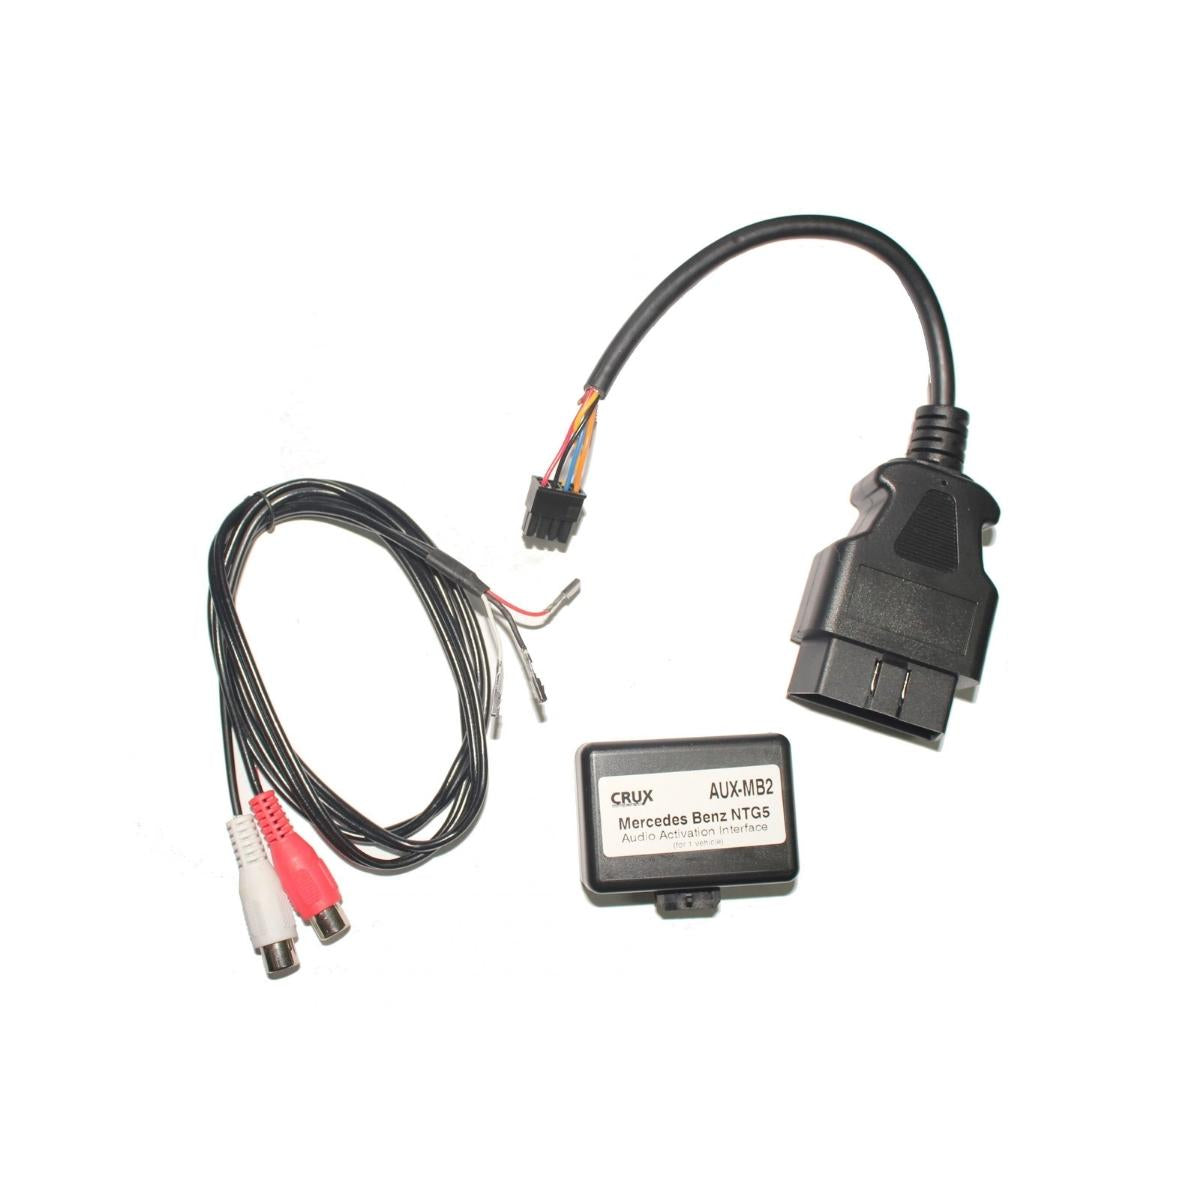 CRUX AUX-MB2 Auxiliary Audio Interface and OBD Coder